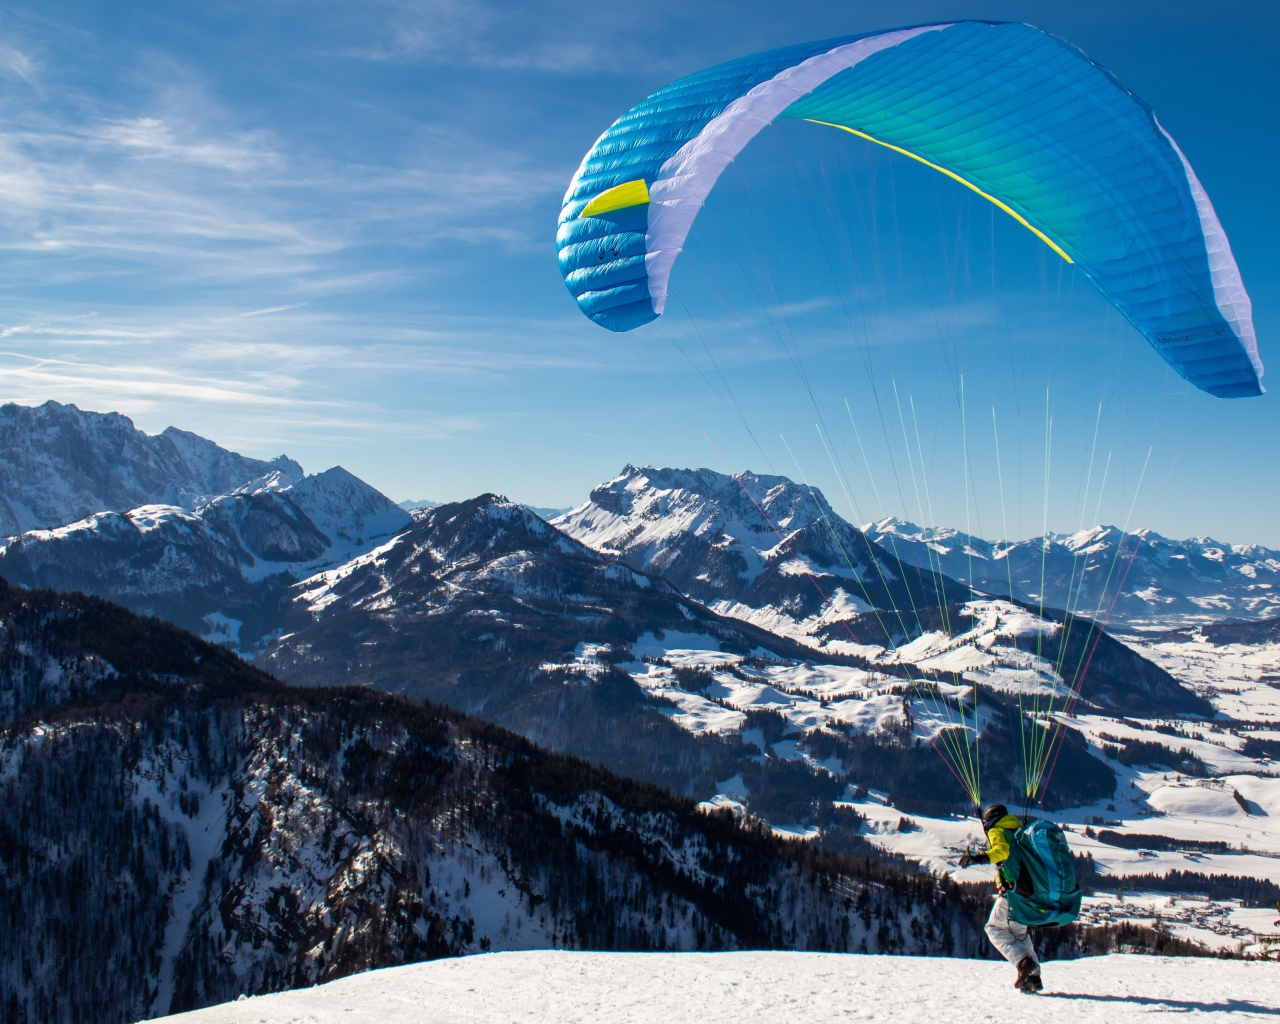 Paraglider jumping from a mountain in winter